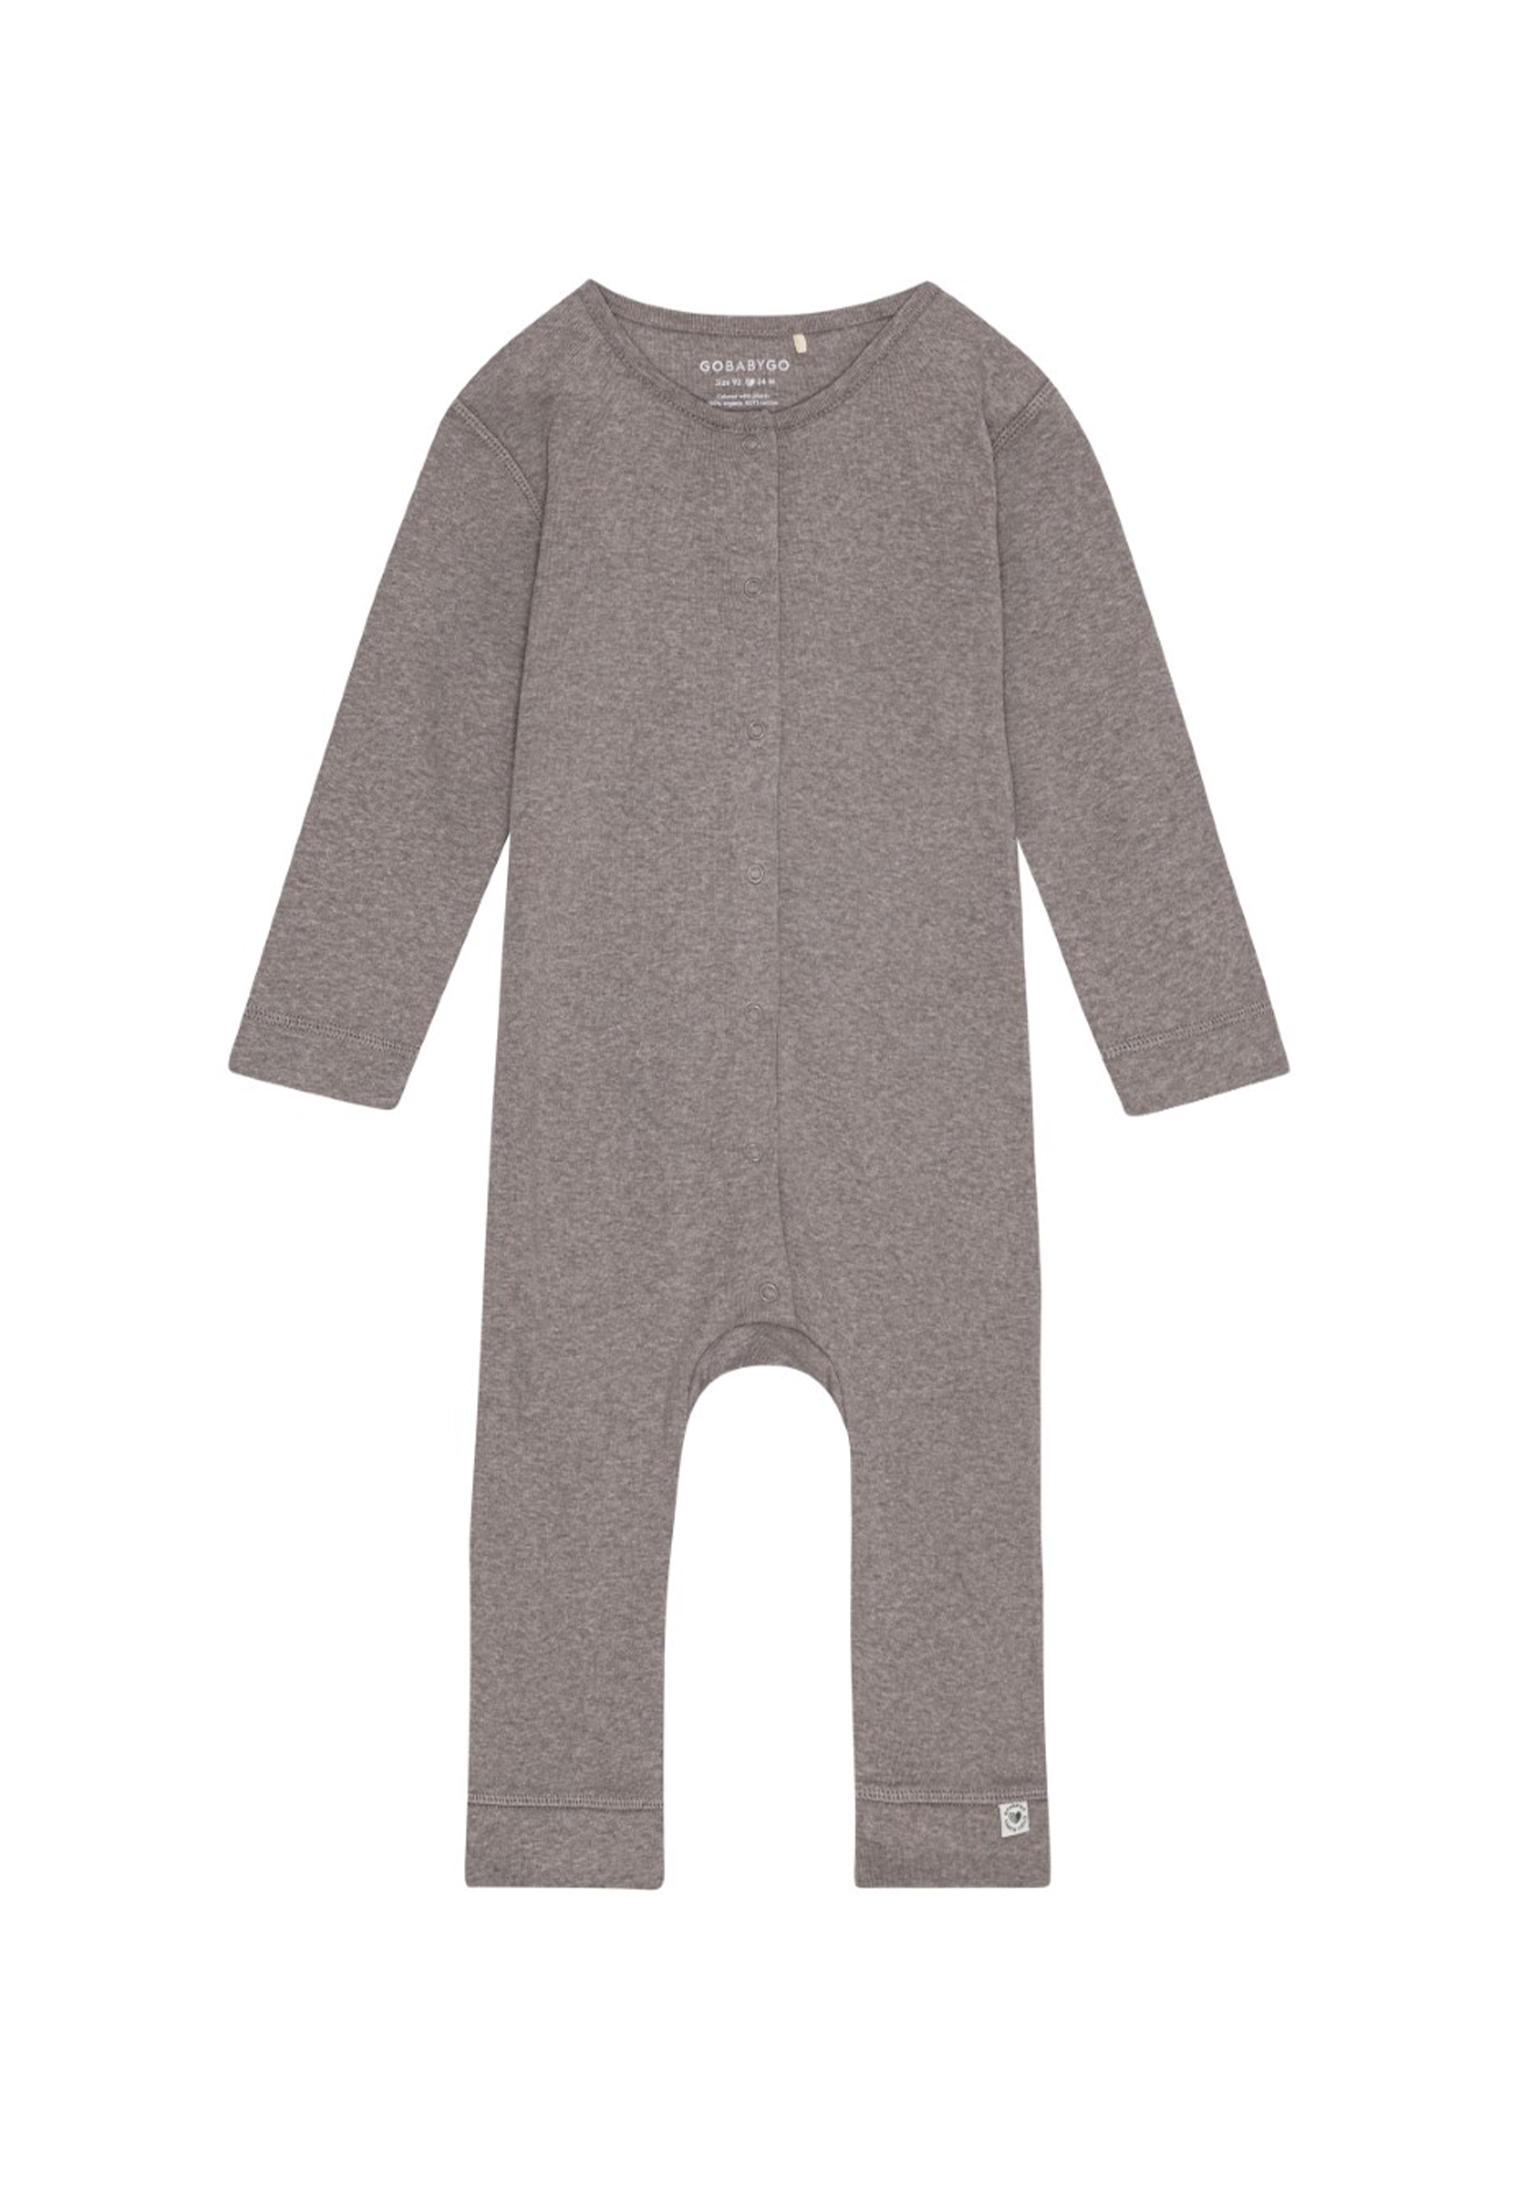 MAMA.LICIOUS Baby one-piece suit - 33333323